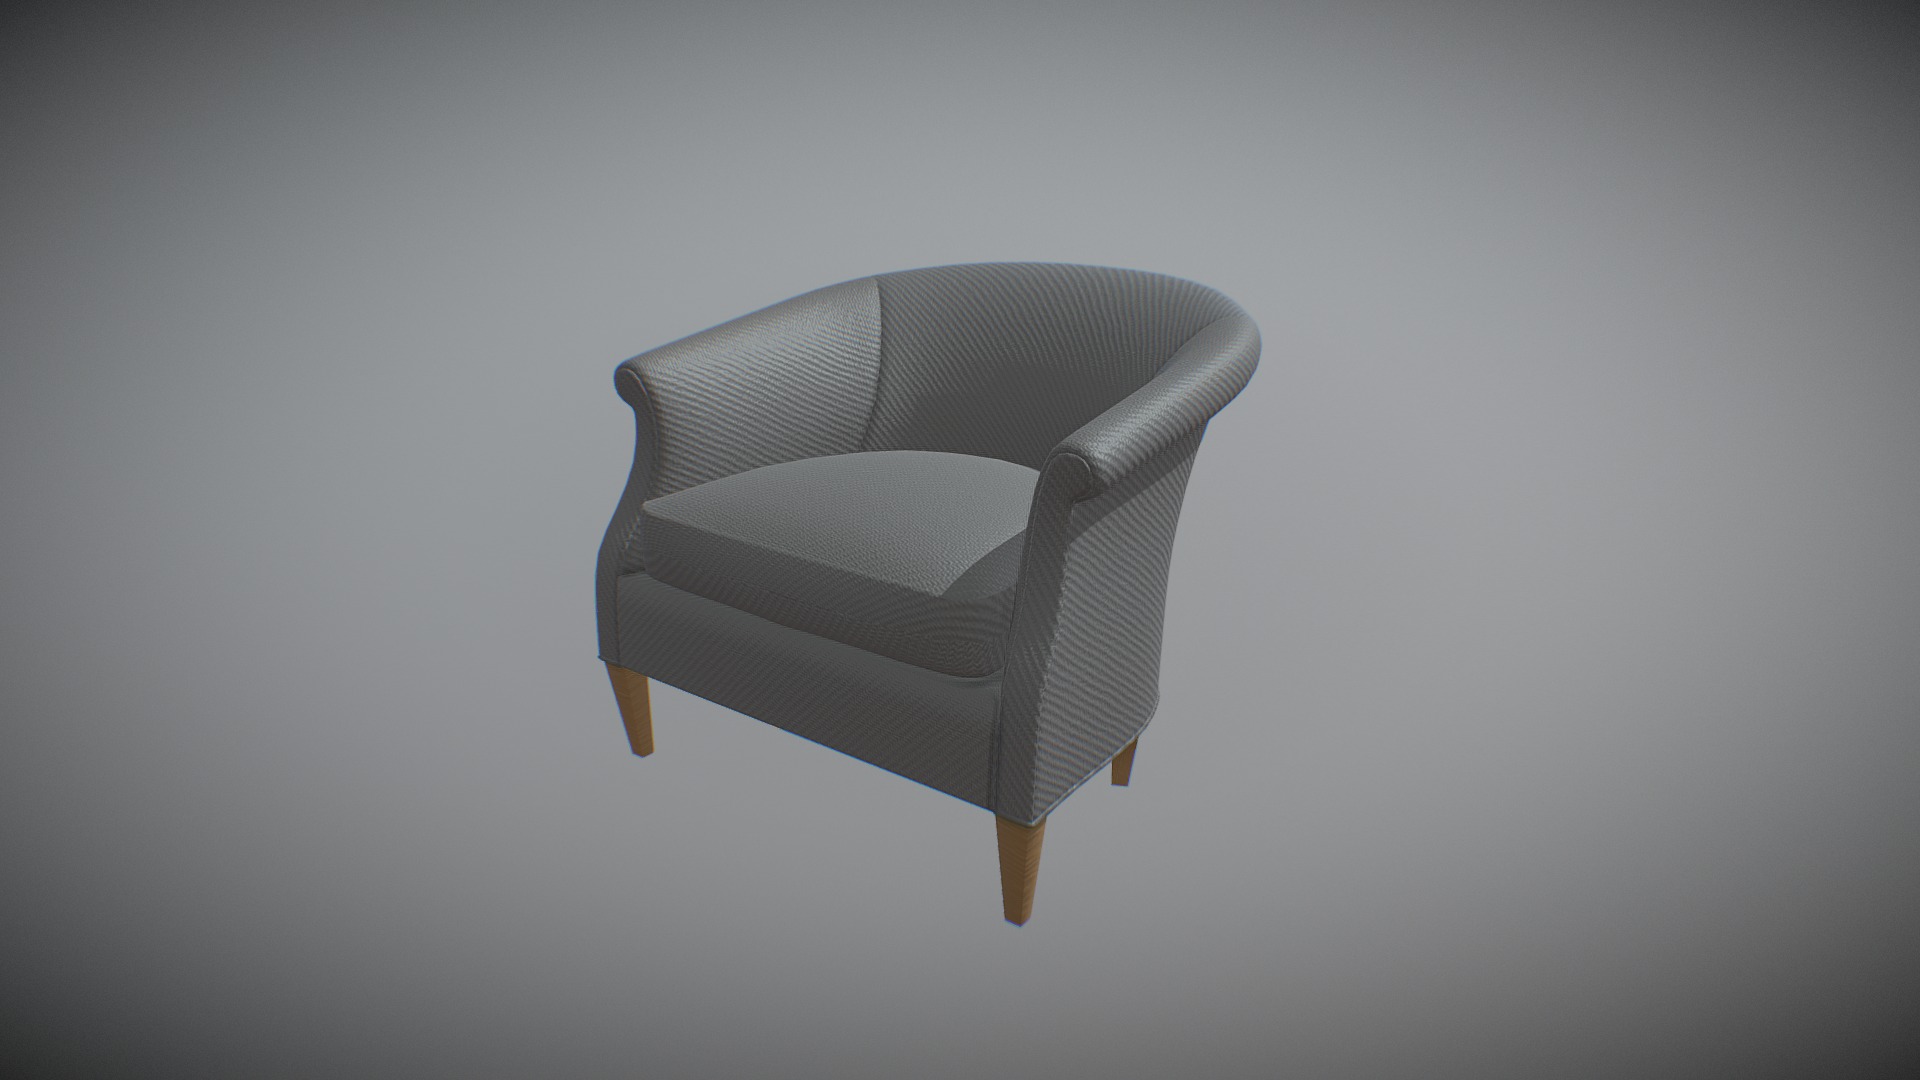 3D model albert chair - This is a 3D model of the albert chair. The 3D model is about a chair made out of paper.